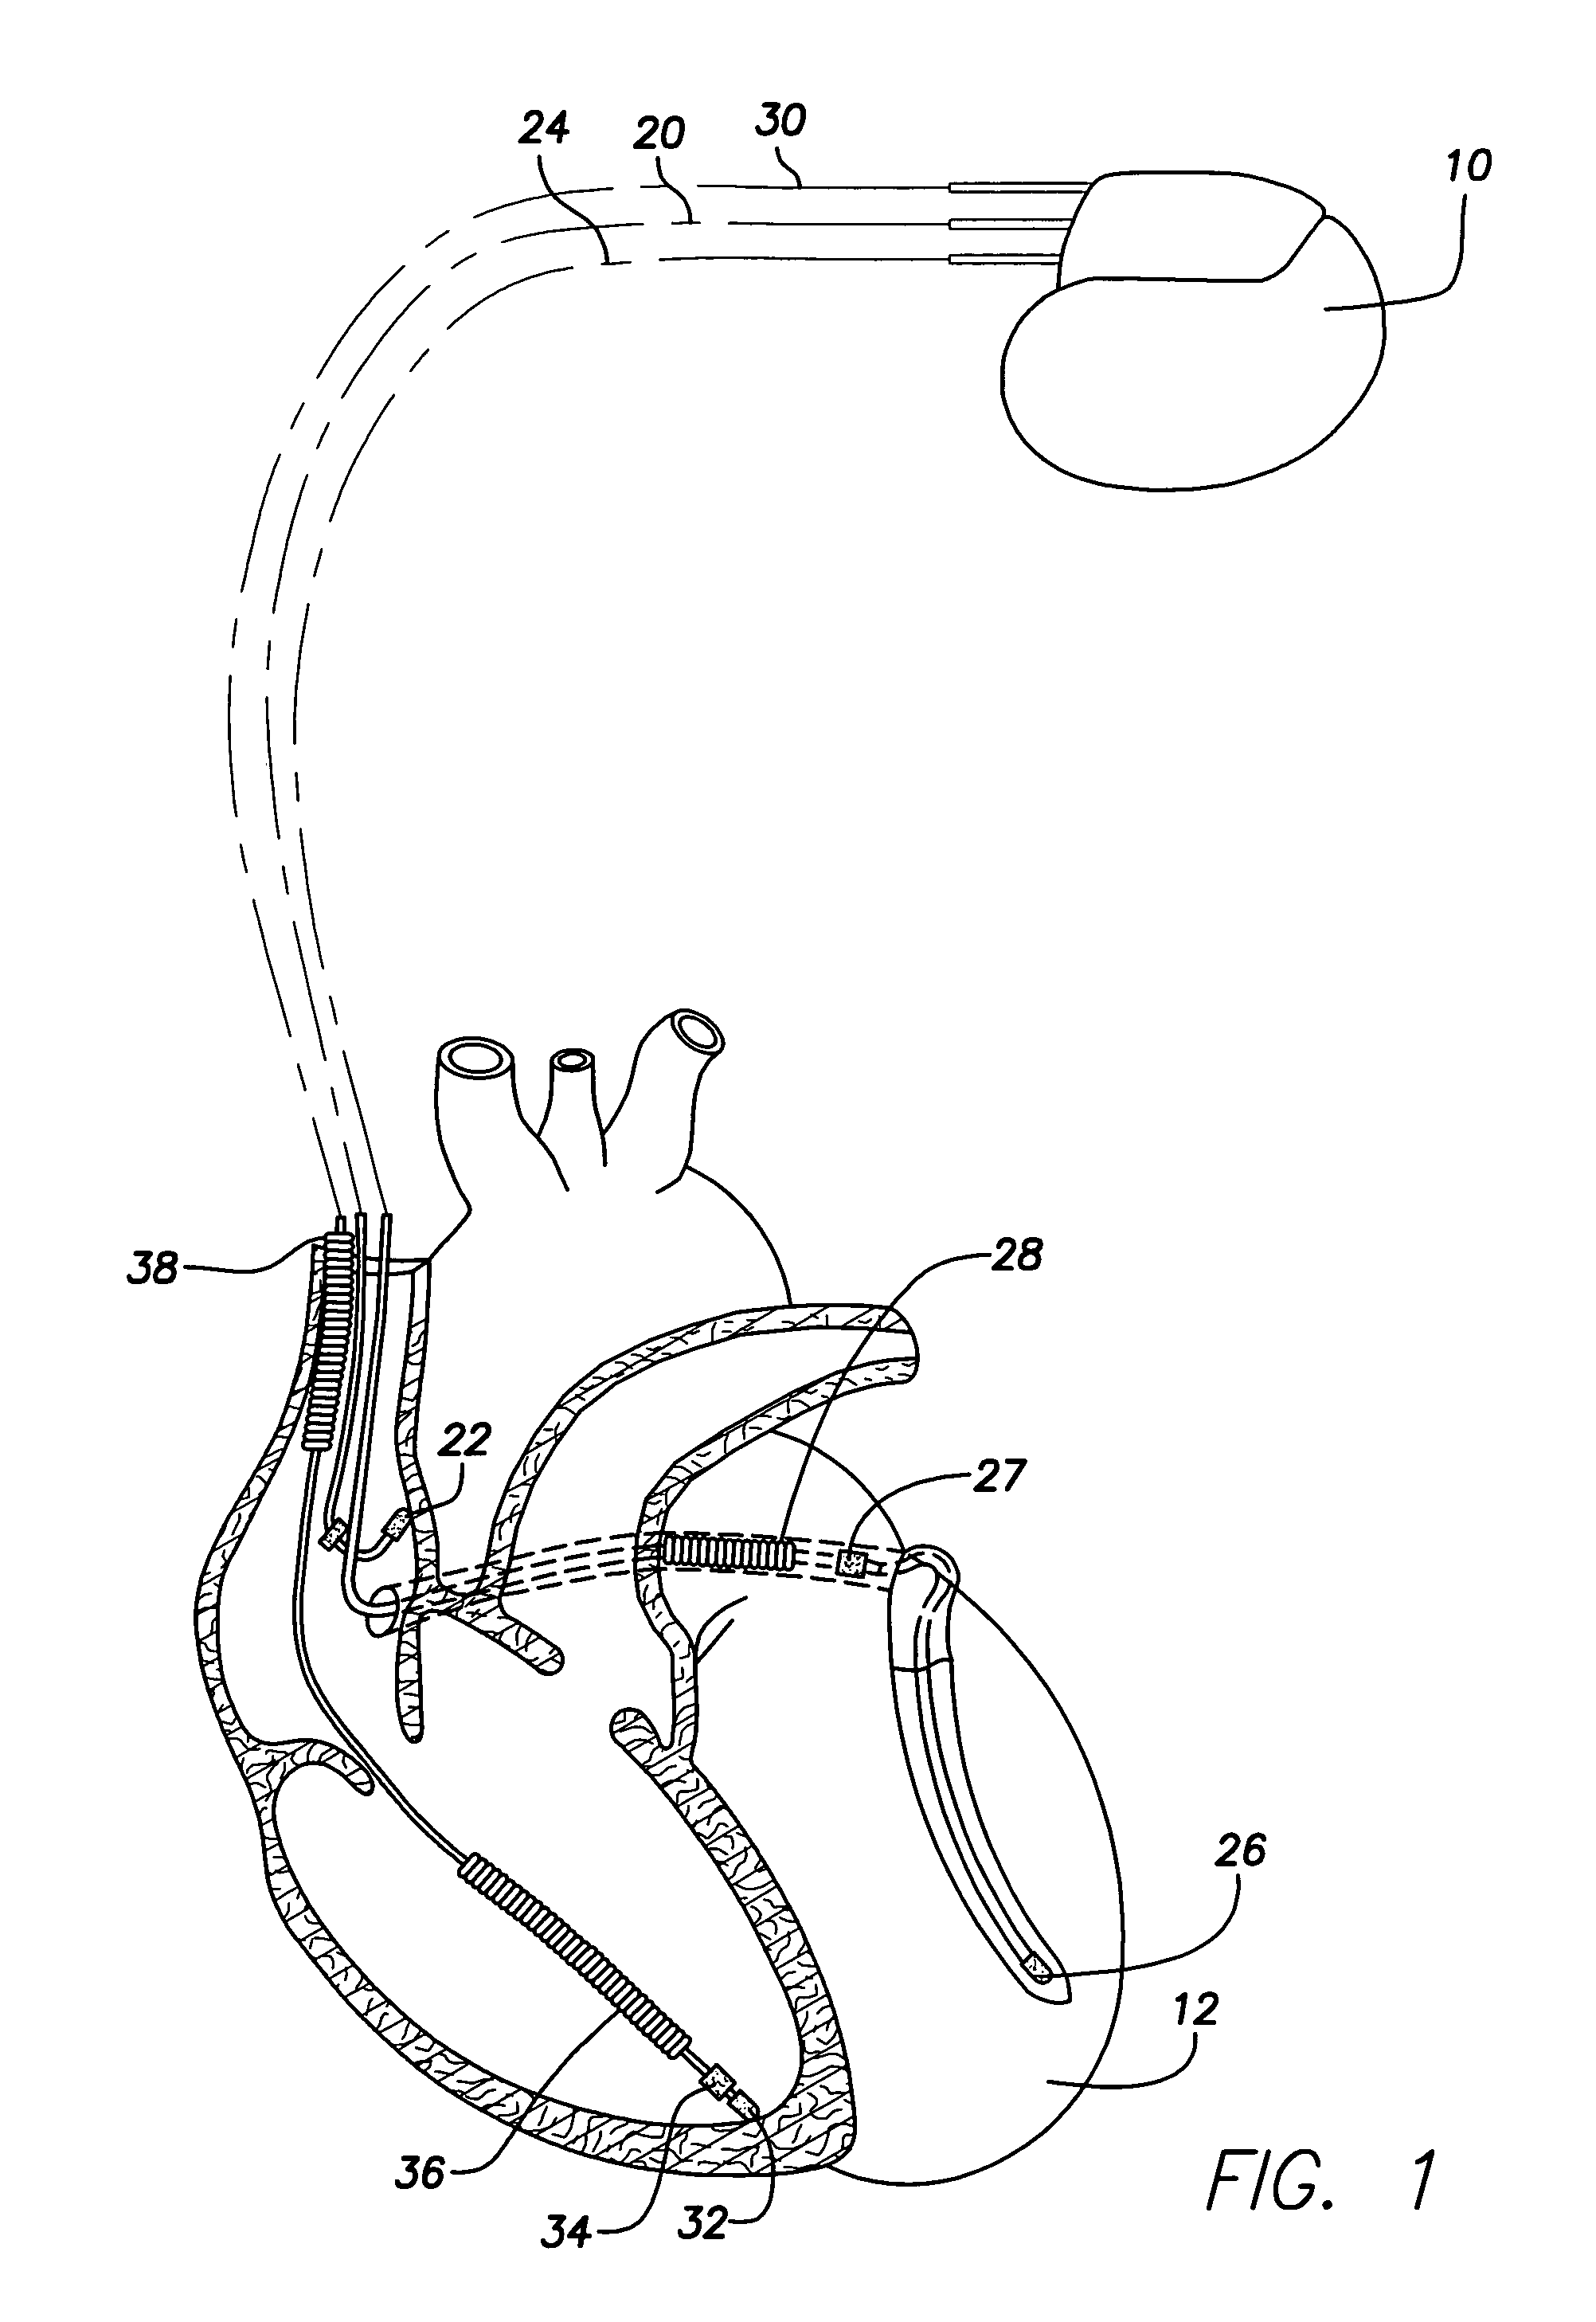 Method and apparatus to backup, update and share data among implantable cardiac stimulation device programmers